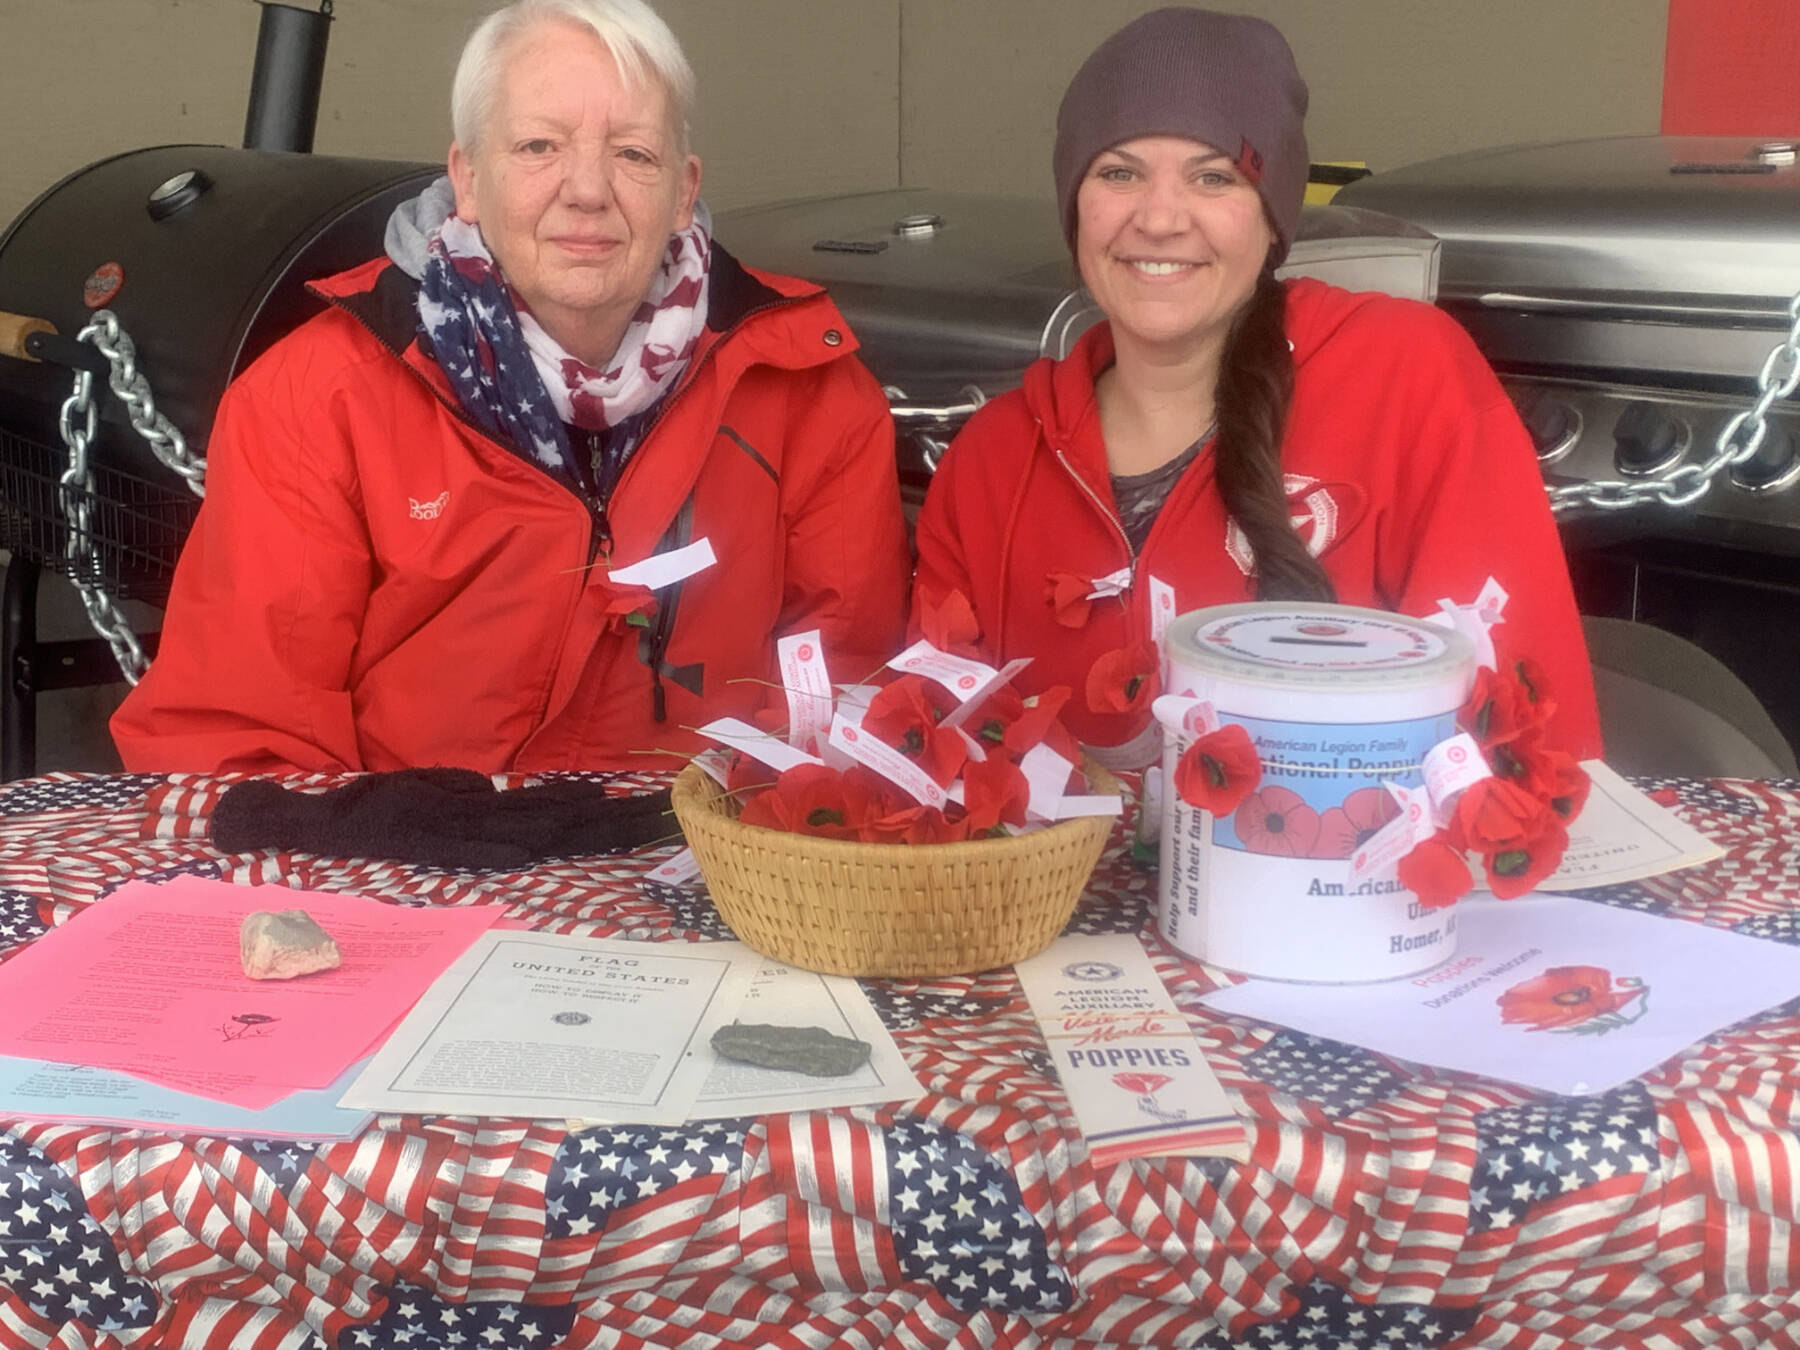 Colleen Wagner and Brianna Bahl distribute paper poppies on Memorial Day weekend outside Safeway on behalf of the American Legion in Homer, Alaska. Photo by Christina Whiting